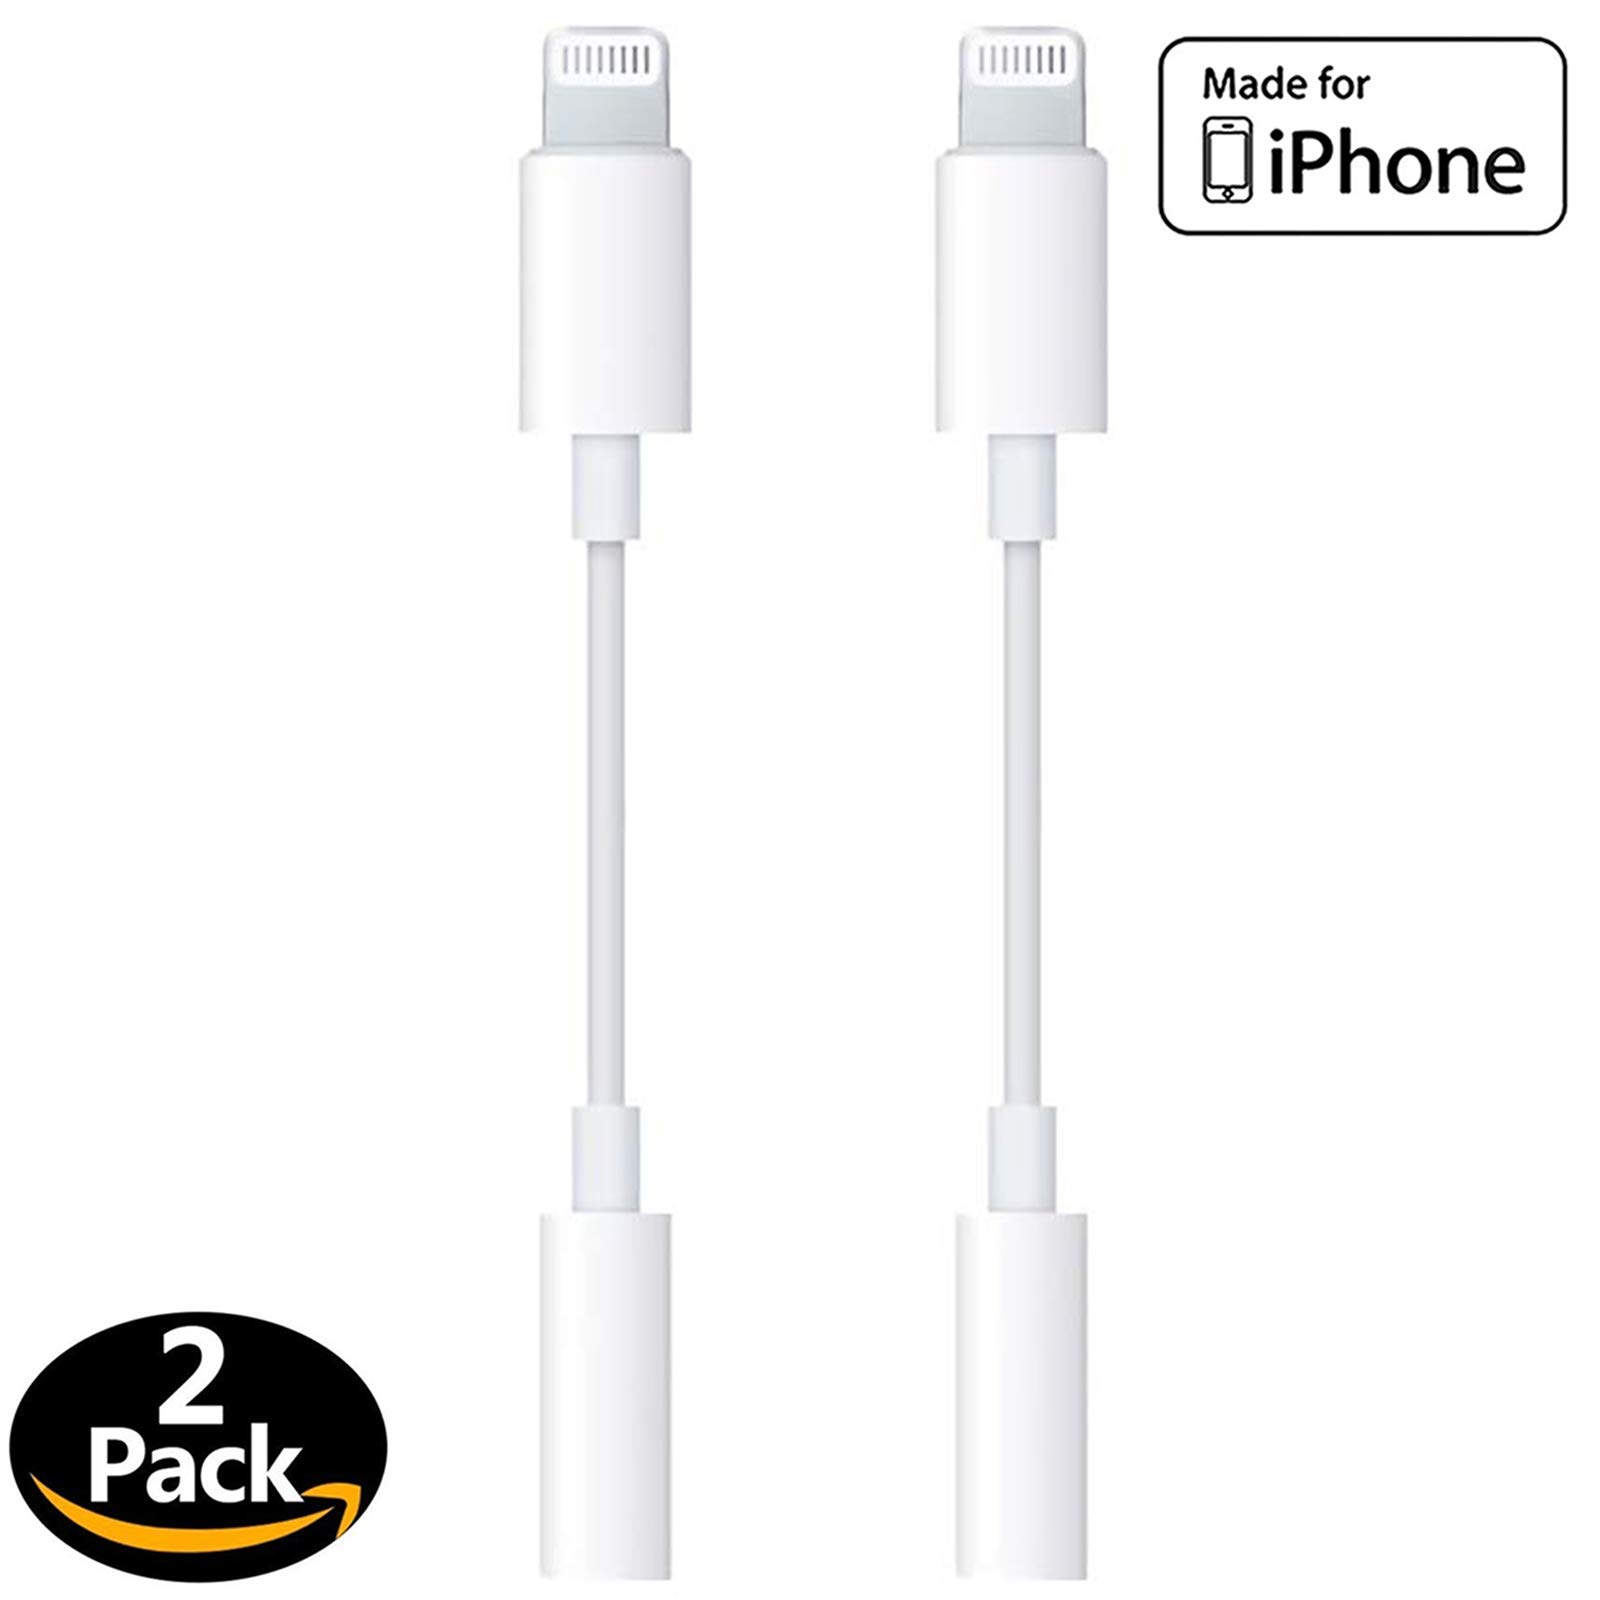 [Apple MFi Certified] iPhone 3.5 mm Headphone Jack Adapter, Lightning to 3.5mm Headphone Aux Audio Dongle Splitter Jack Adaptor Compatible for iPhone 11/11 Pro/XR/XS Max/X/8/7 Support All iOS System